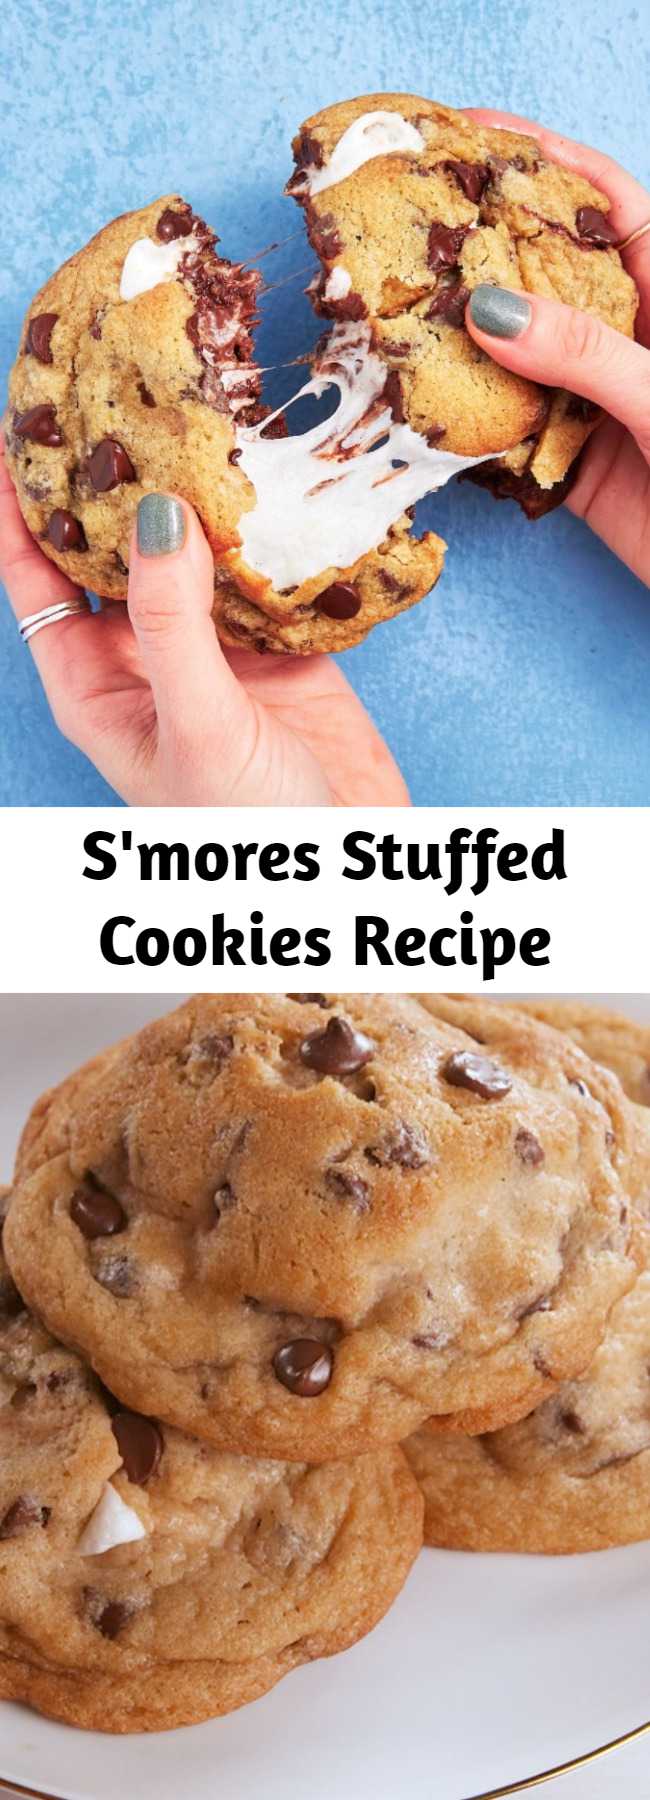 S'mores Stuffed Cookies Recipe - To insure your cookie doesn't turn into a big puddle with graham cracker poking out, refrigerate your cookies before you bake them. 10 to 15 minutes should do the trick — no longer than an hour though, or your marshmallows won't melt while baking! #easyrecipe #baking #smores #cookie #dessert